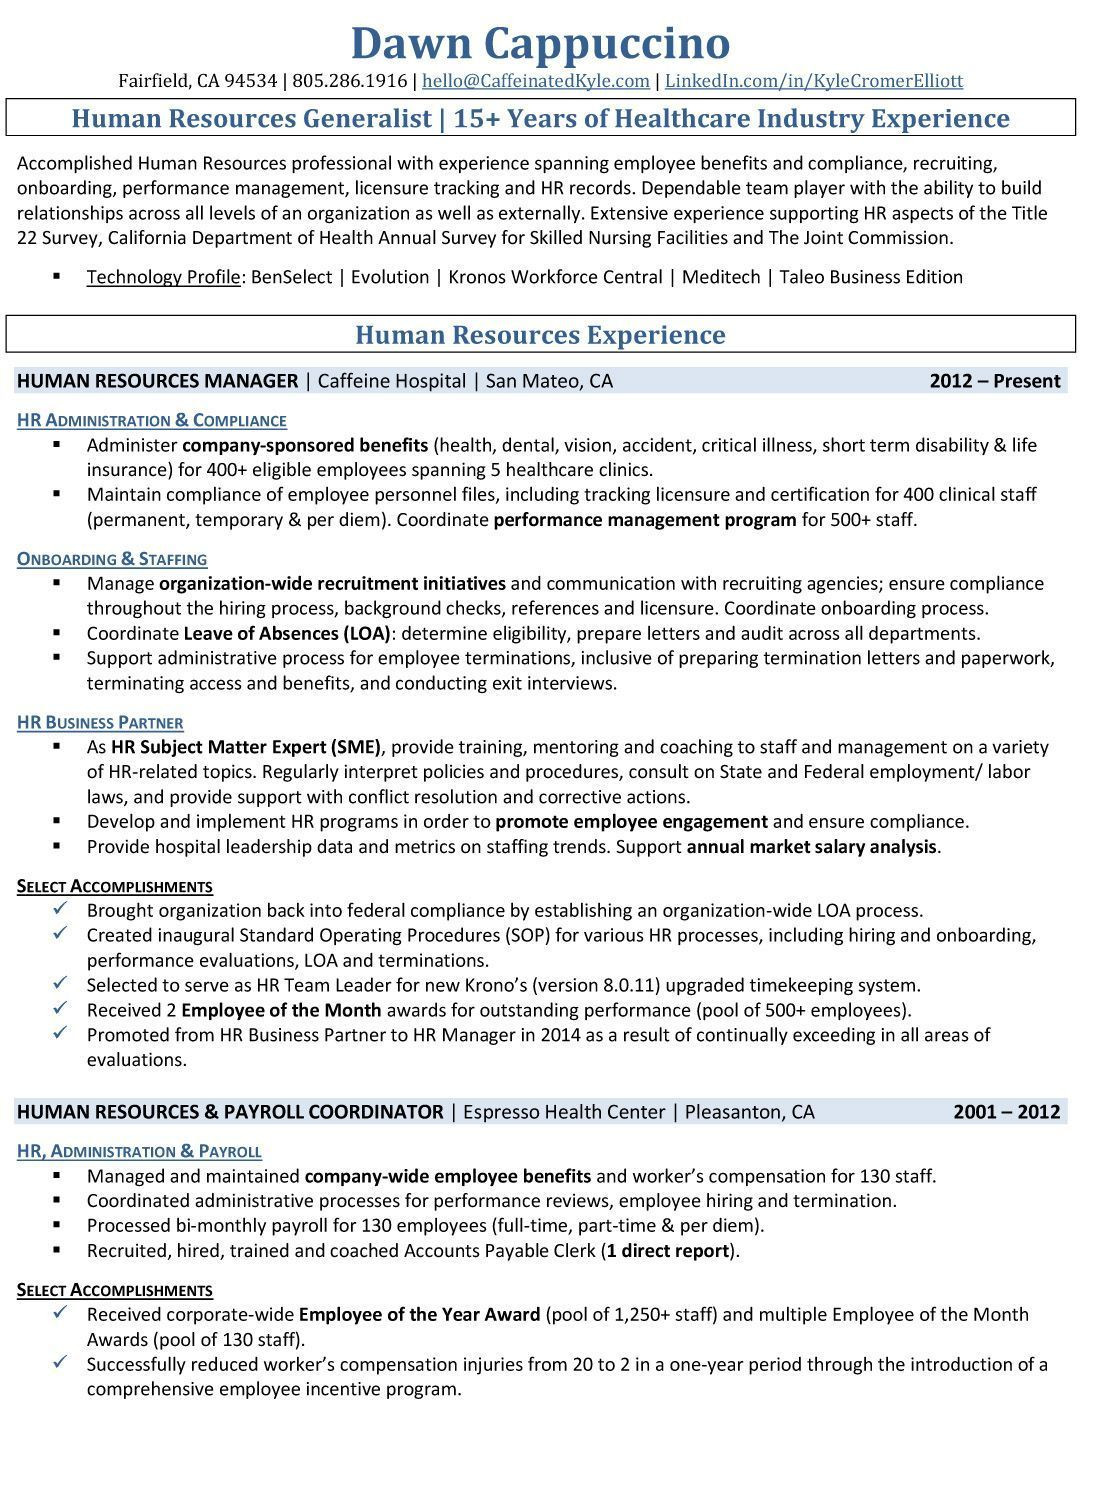 Sample Human Resources Resume for An Intern Human Resources Intern Resume Example Human Resources Resume …